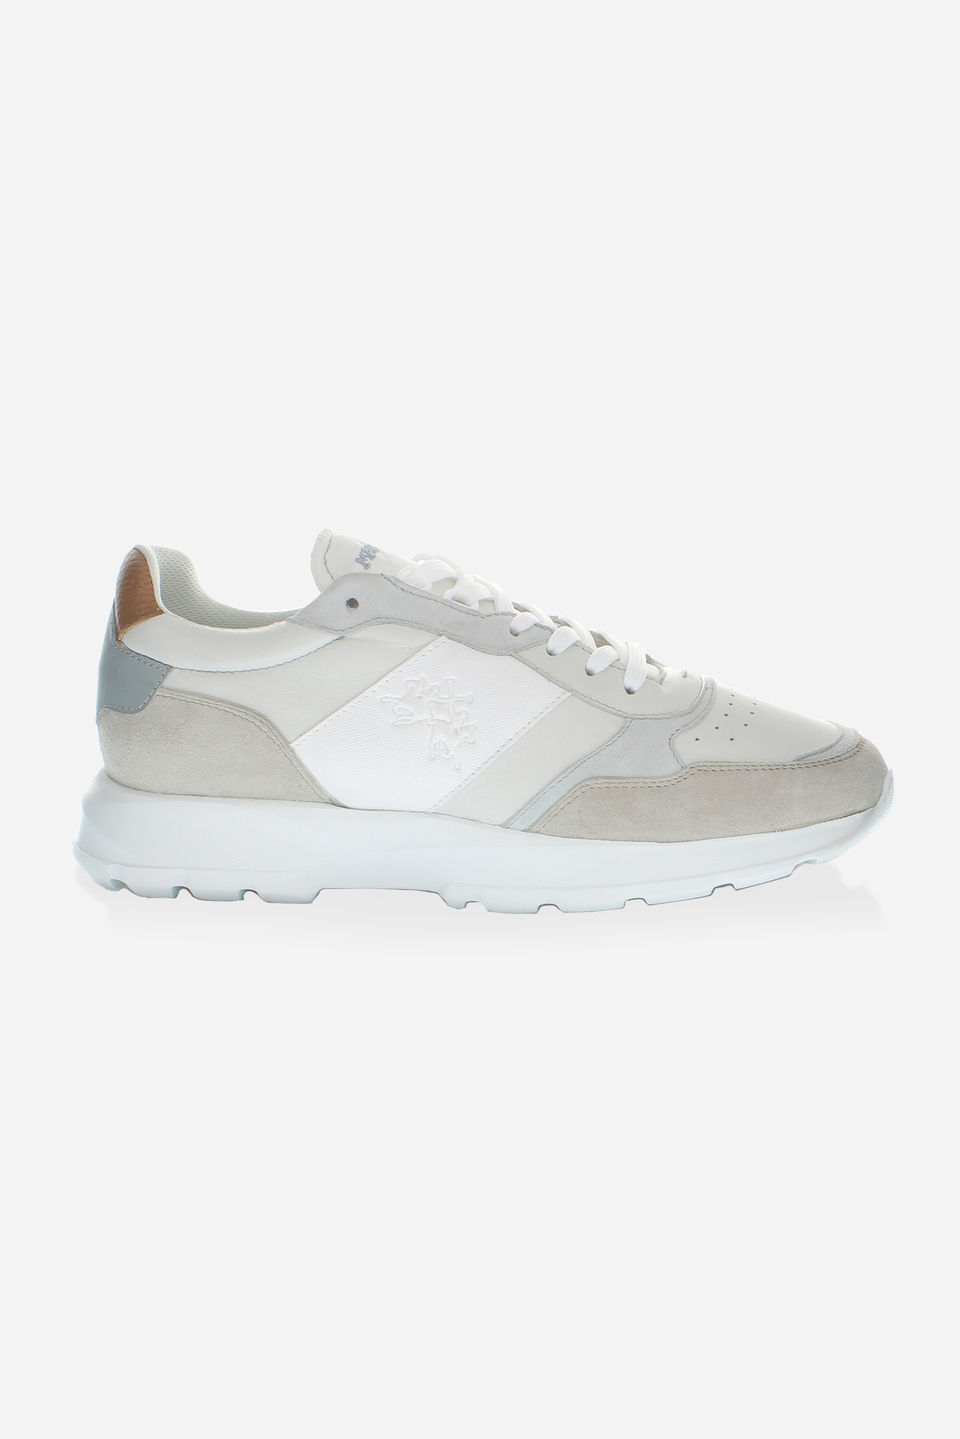 Trainers in mix of leather, fabric and suede | La Martina - Official Online Shop